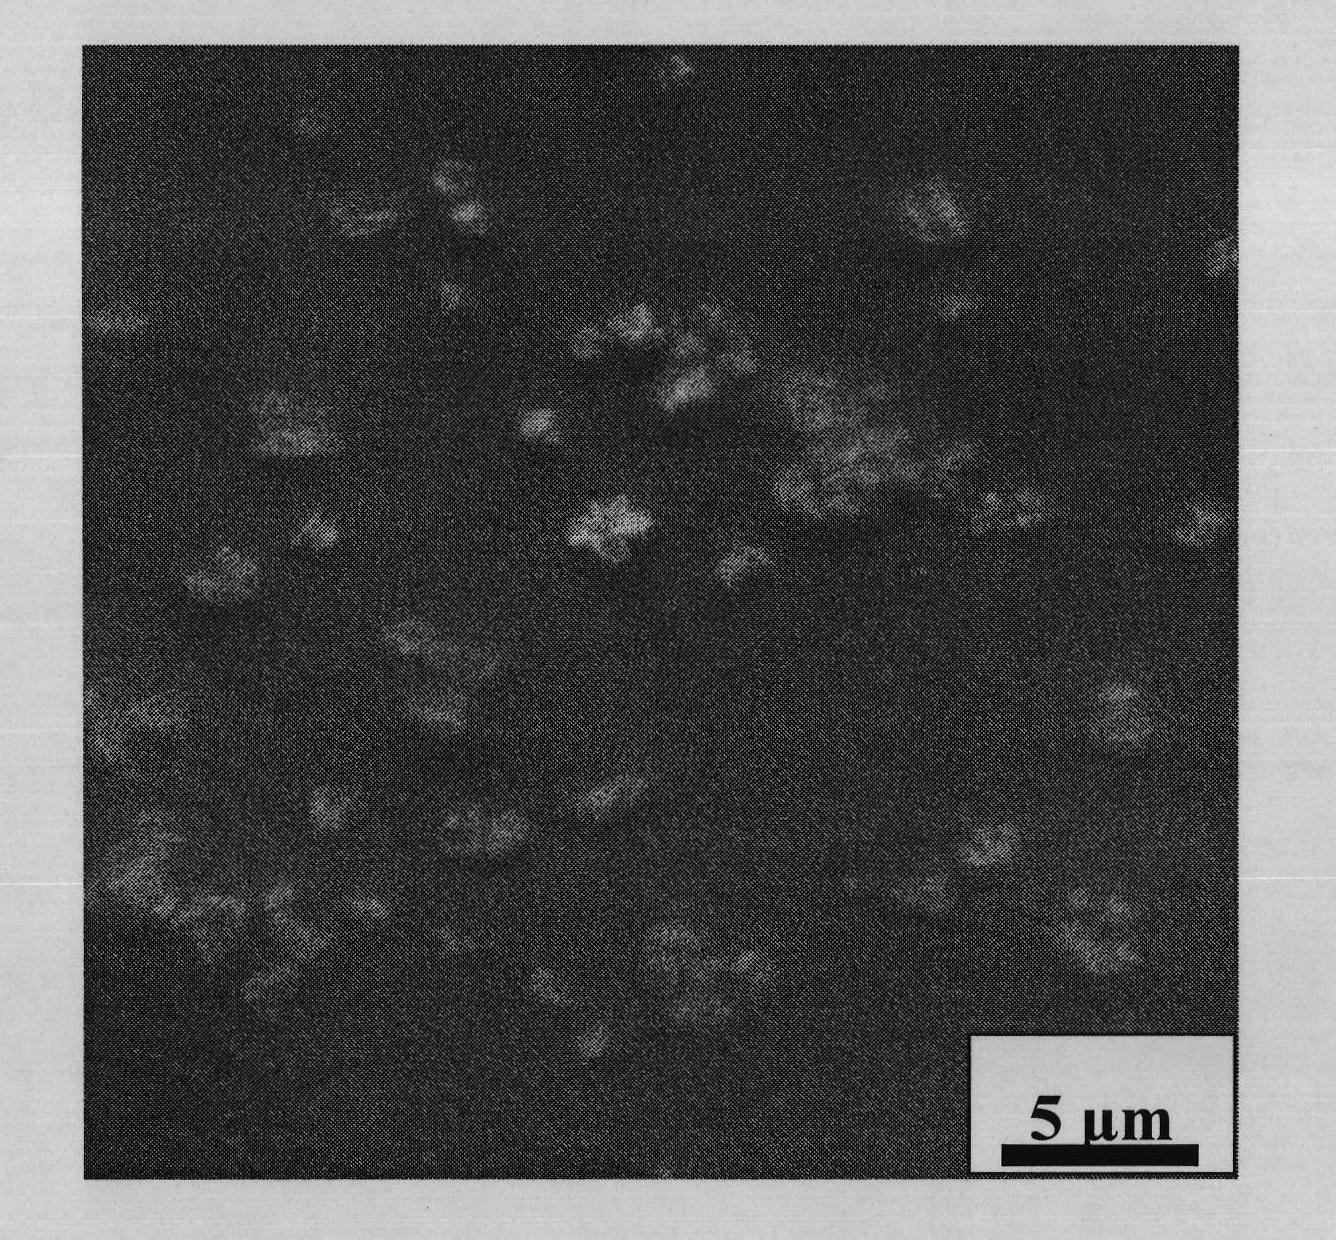 Method for preparing high-purity copper oxide superfine powder from waste printed circuit boards